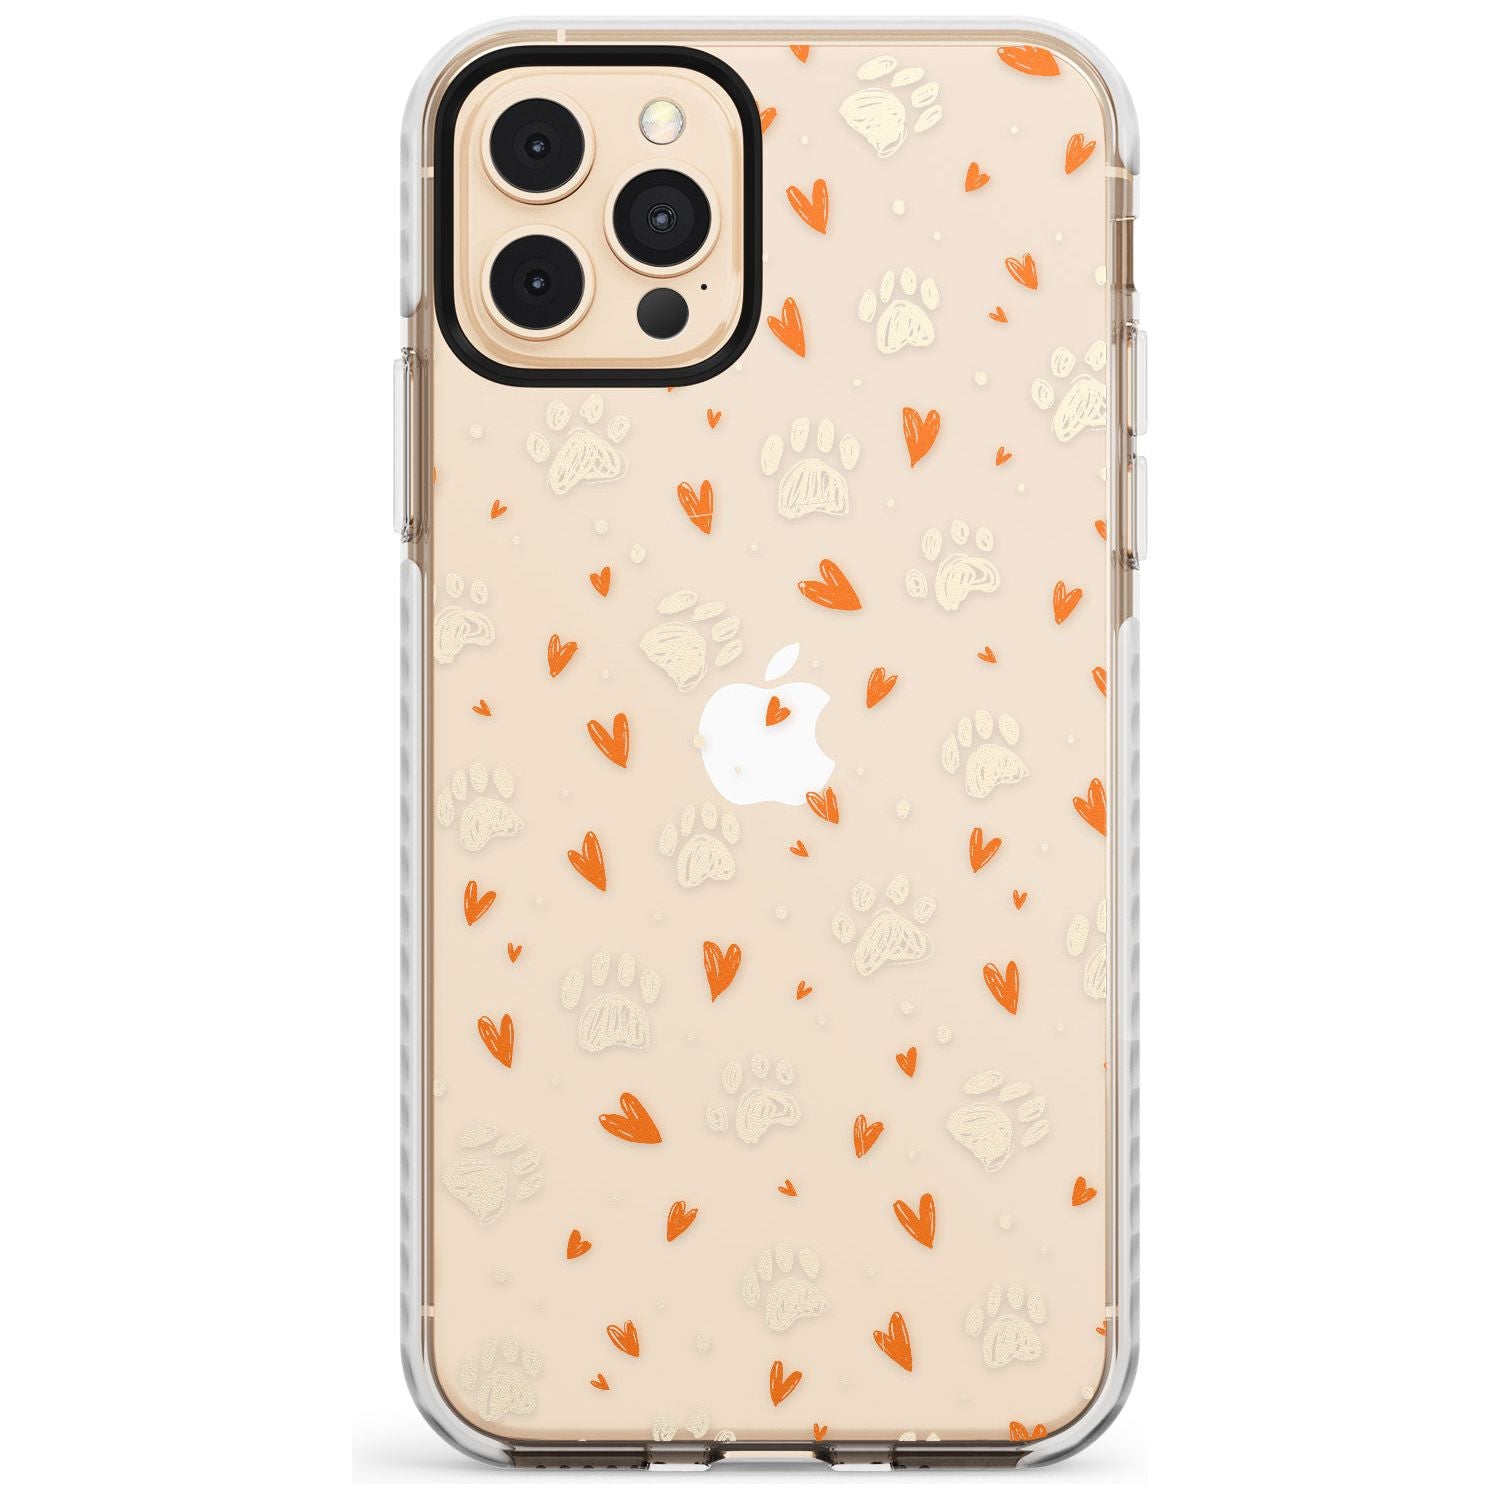 Paws & Hearts Pattern (Clear) Slim TPU Phone Case for iPhone 11 Pro Max